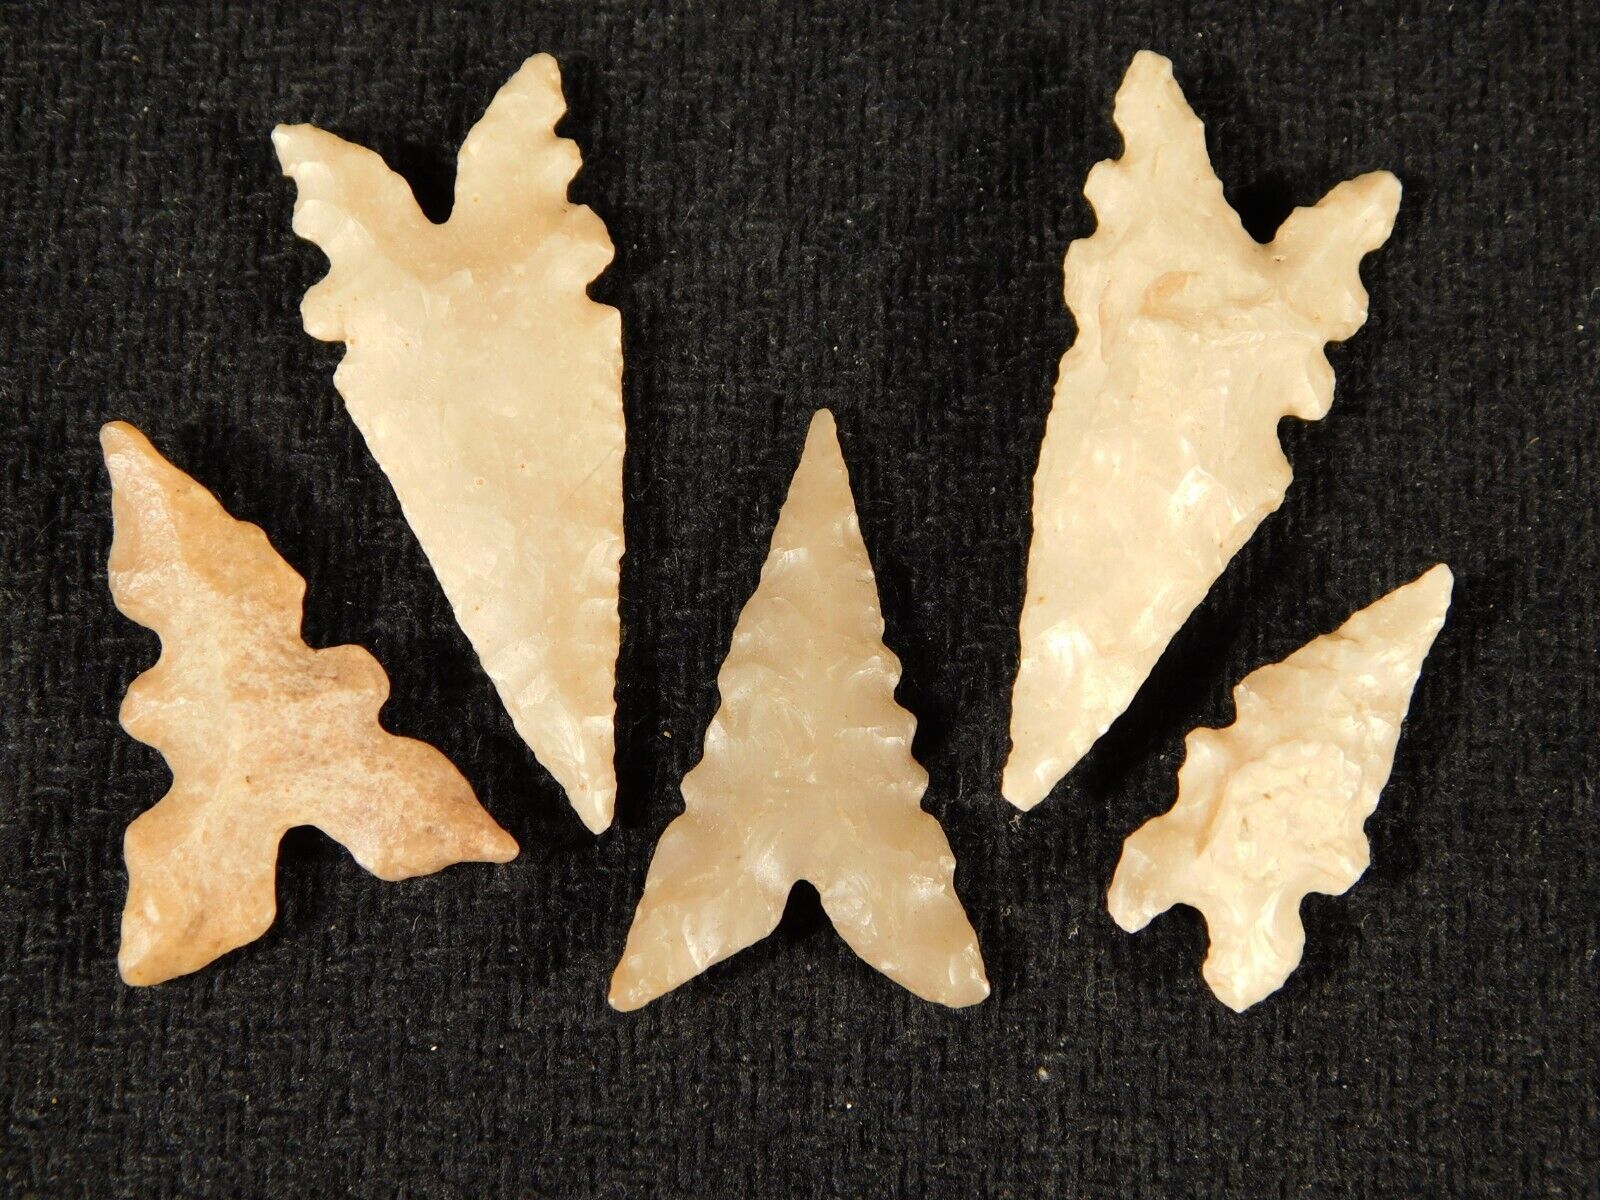 Lot of FIVE Nice Eccentric Ancient North African Tidikelt Arrowhead s 2.18